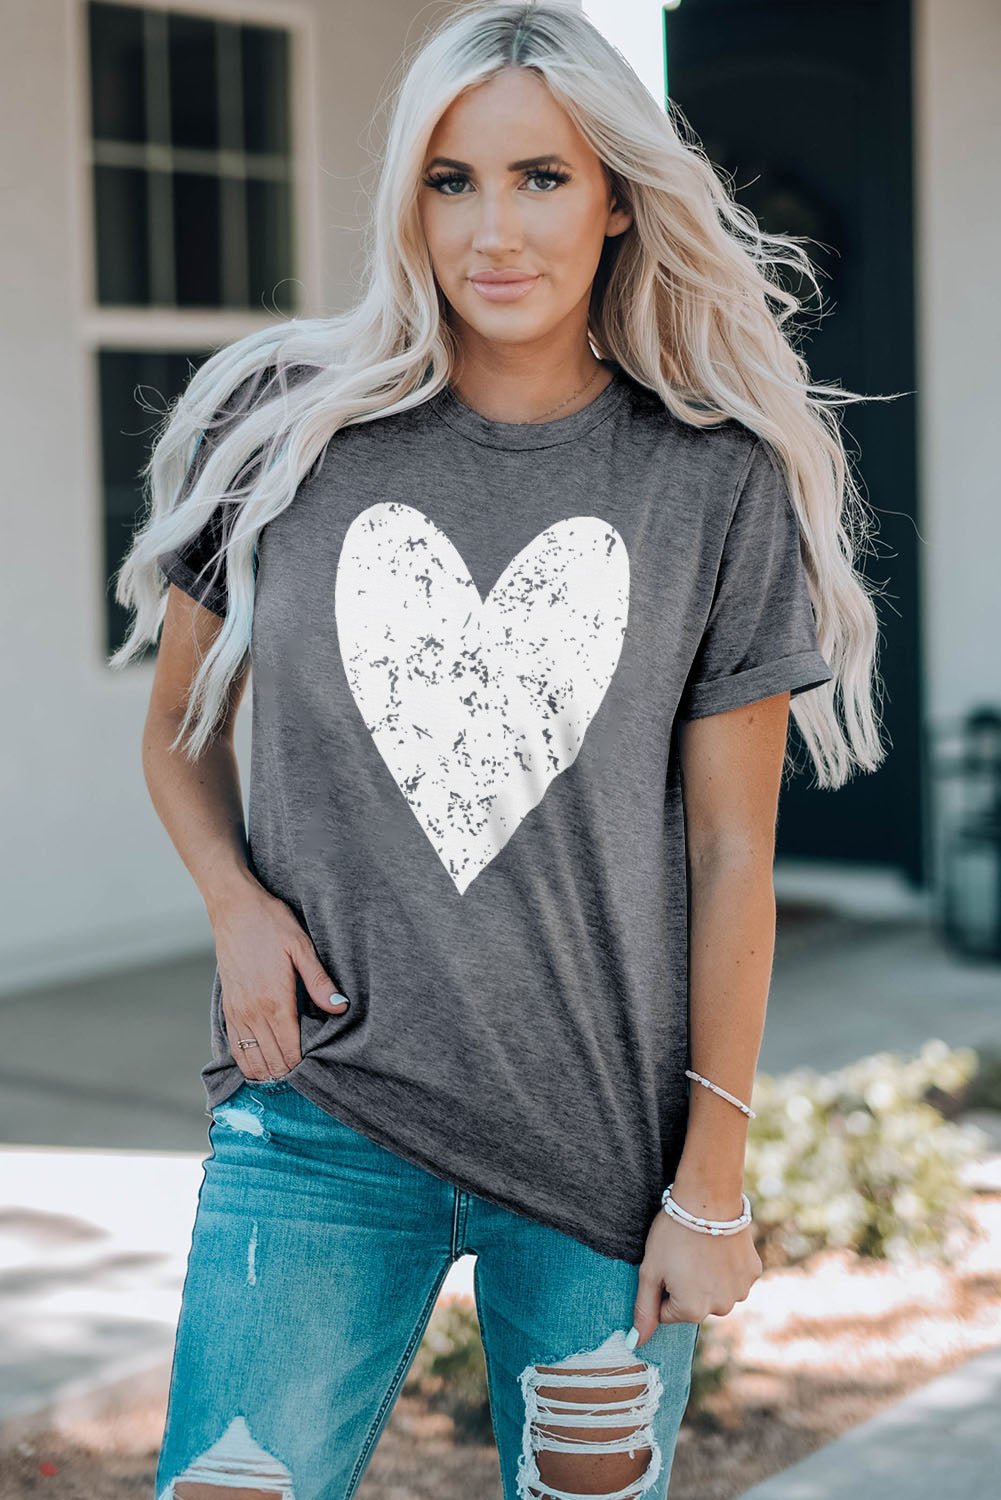 Heart Graphic Cuffed Short Sleeve Tee - Fashion Girl Online Store